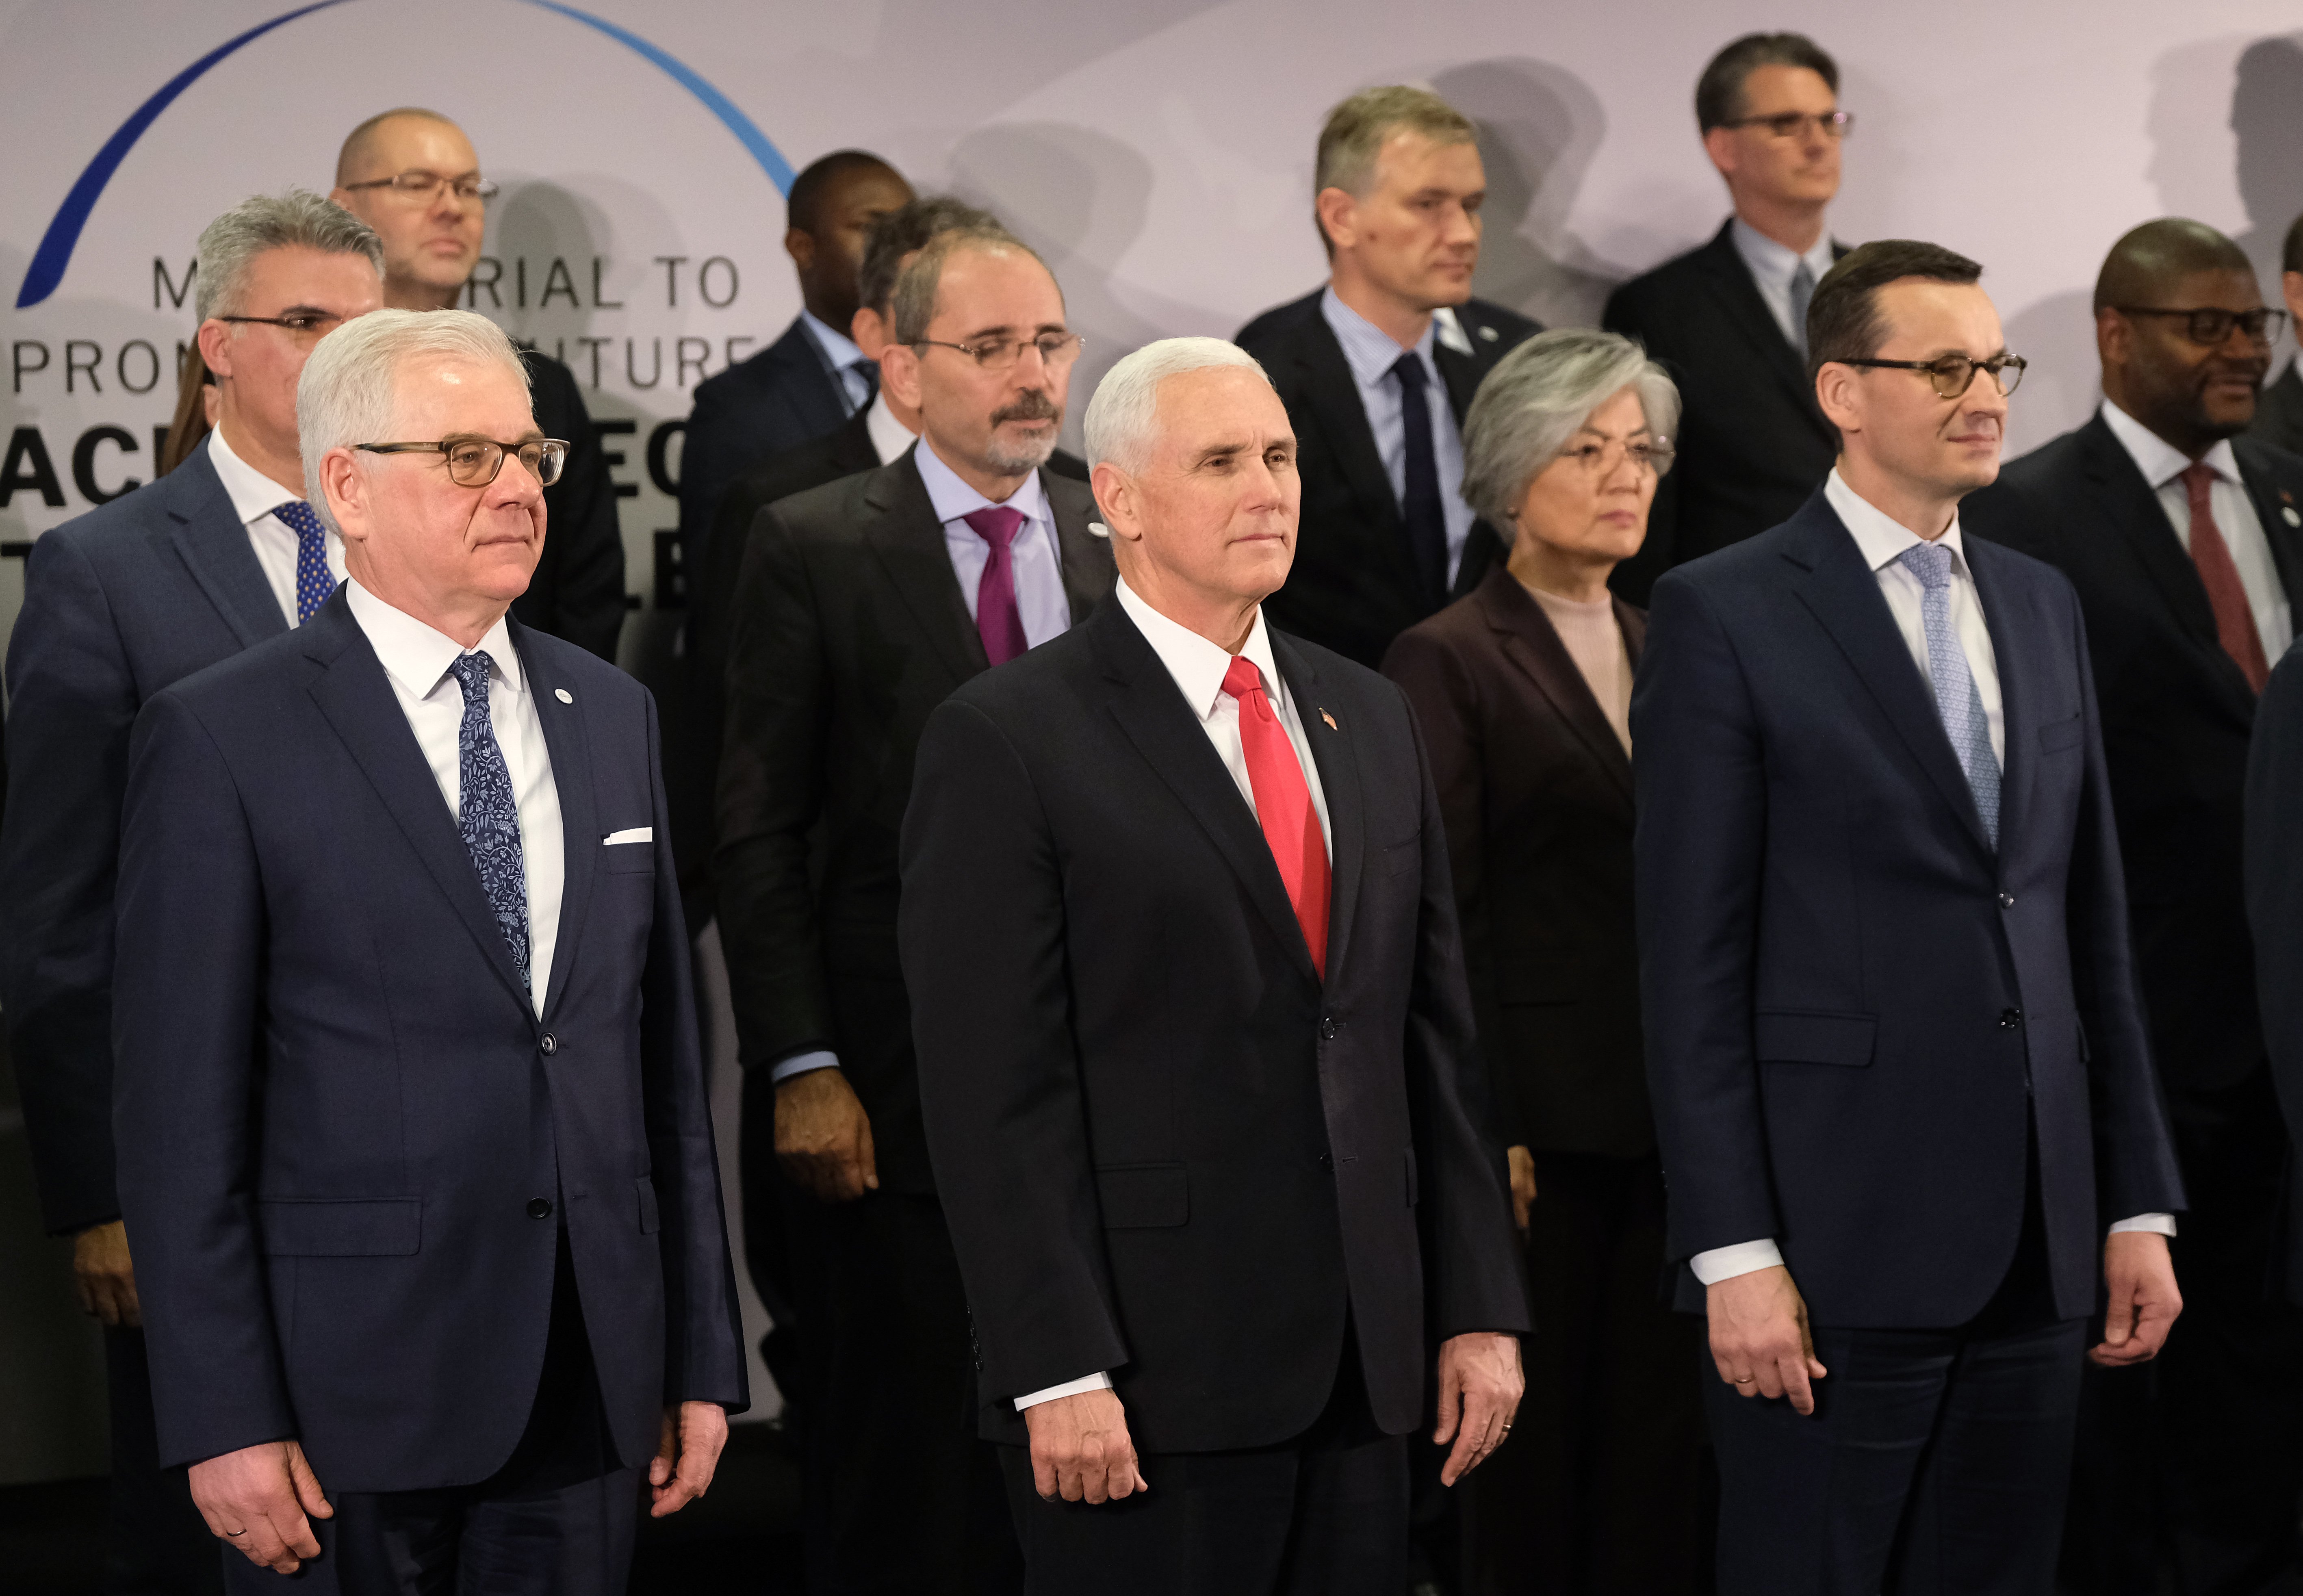 WARSAW, POLAND - FEBRUARY 14: U.S. Vice President Mike Pence (C) stands next to Polish Prime Minister Mateusz Morawiecki (R) and Polish Foreign Minister Jazek Czaputowicz at the group photo at the Ministerial to Promote a Future of Peace and Security in the Middle East on February 14, 2019 in Warsaw, Poland. (Sean Gallup/Getty Images)